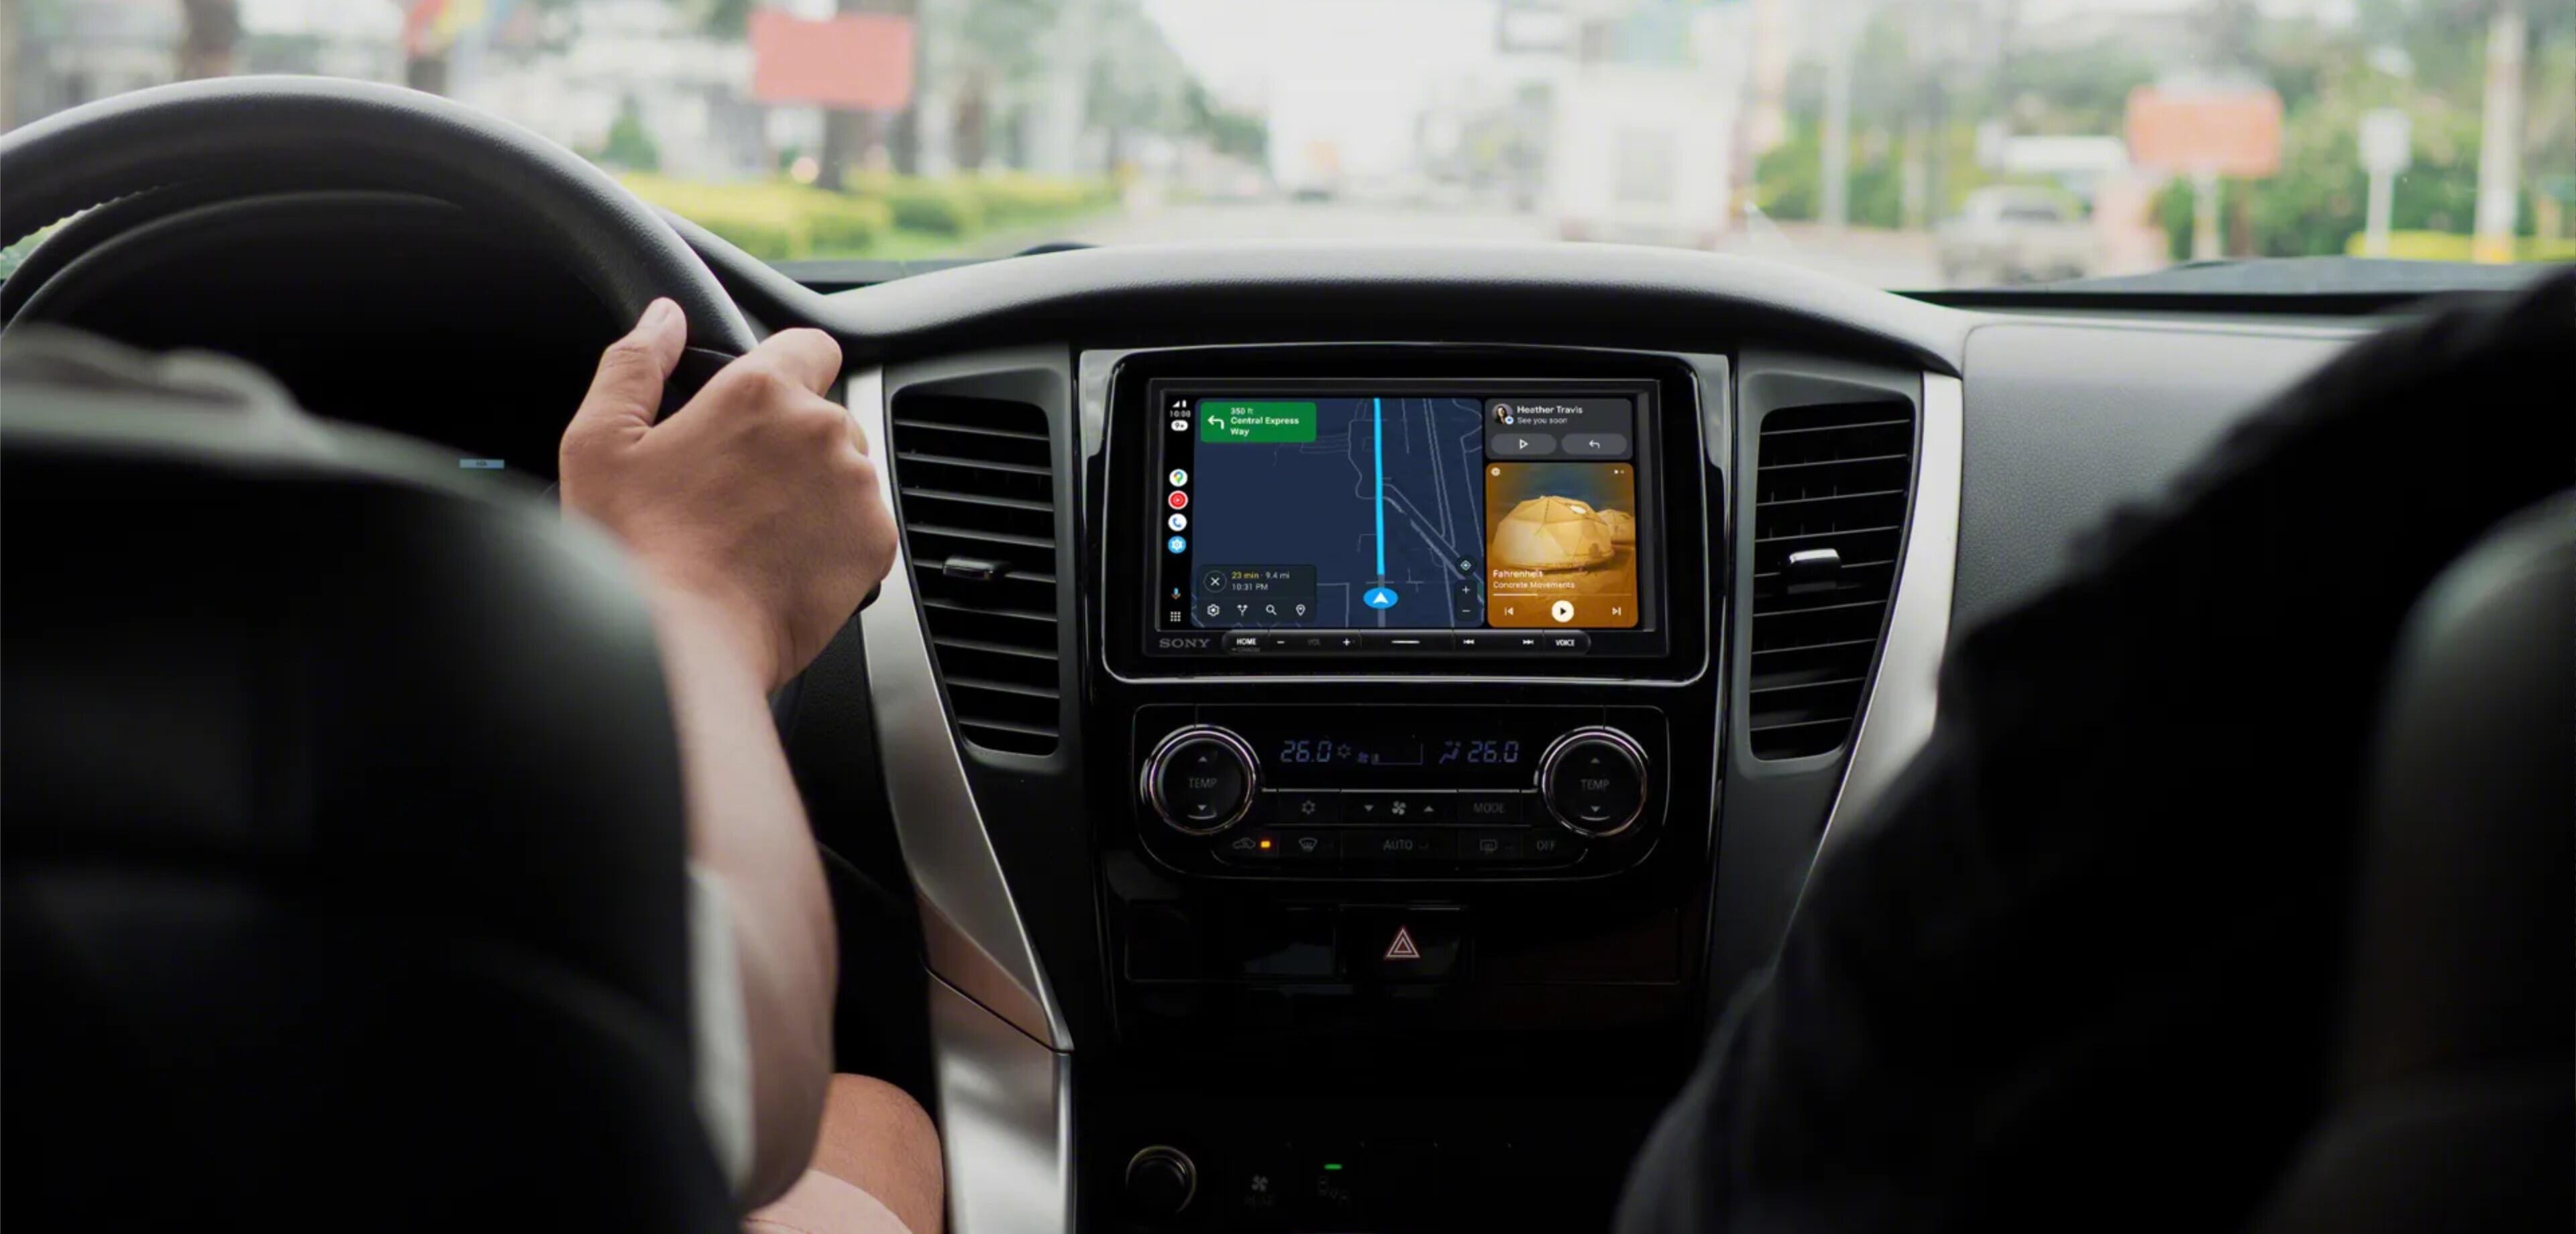 <h3>Latest Sony Multimedia Car Stereos</h3><h4>Enjoy Apple CarPlay or Android Auto at your finger tips</h4>